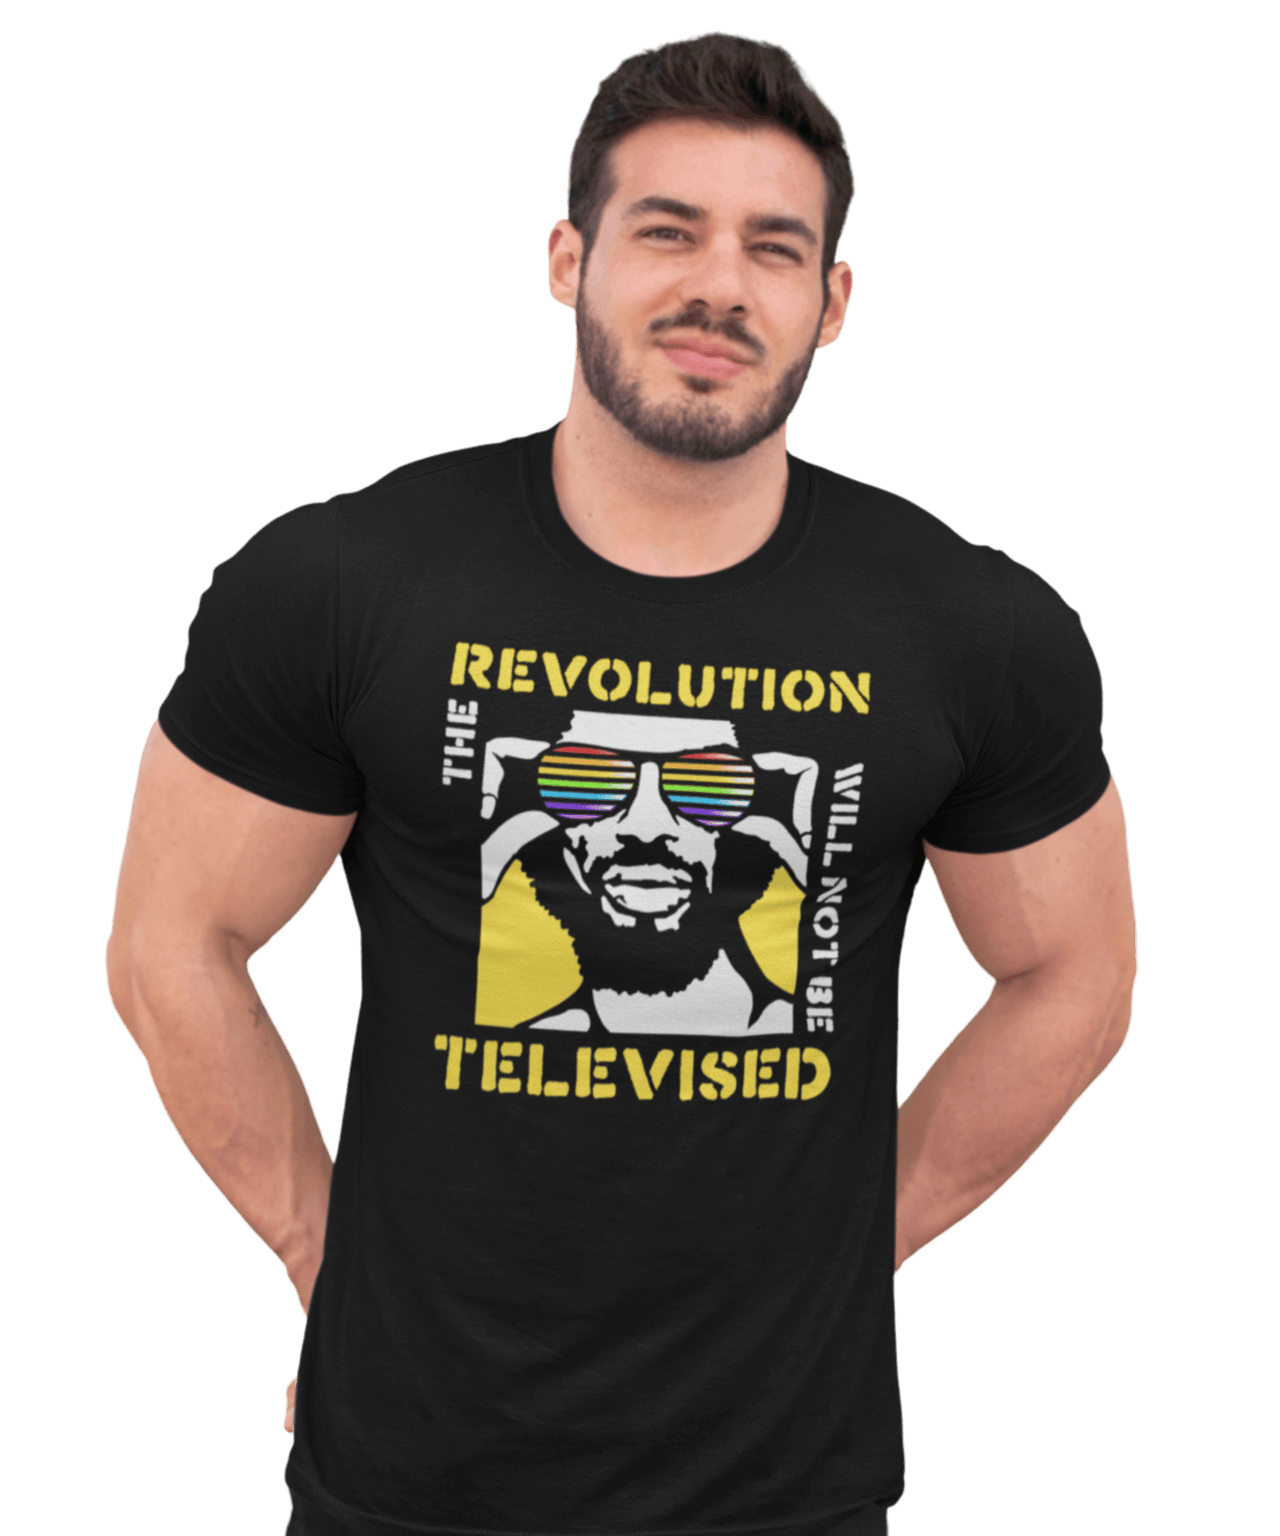 The Revolution Will Not Be Televised Unisex Graphic T-Shirt For Men 8Ball